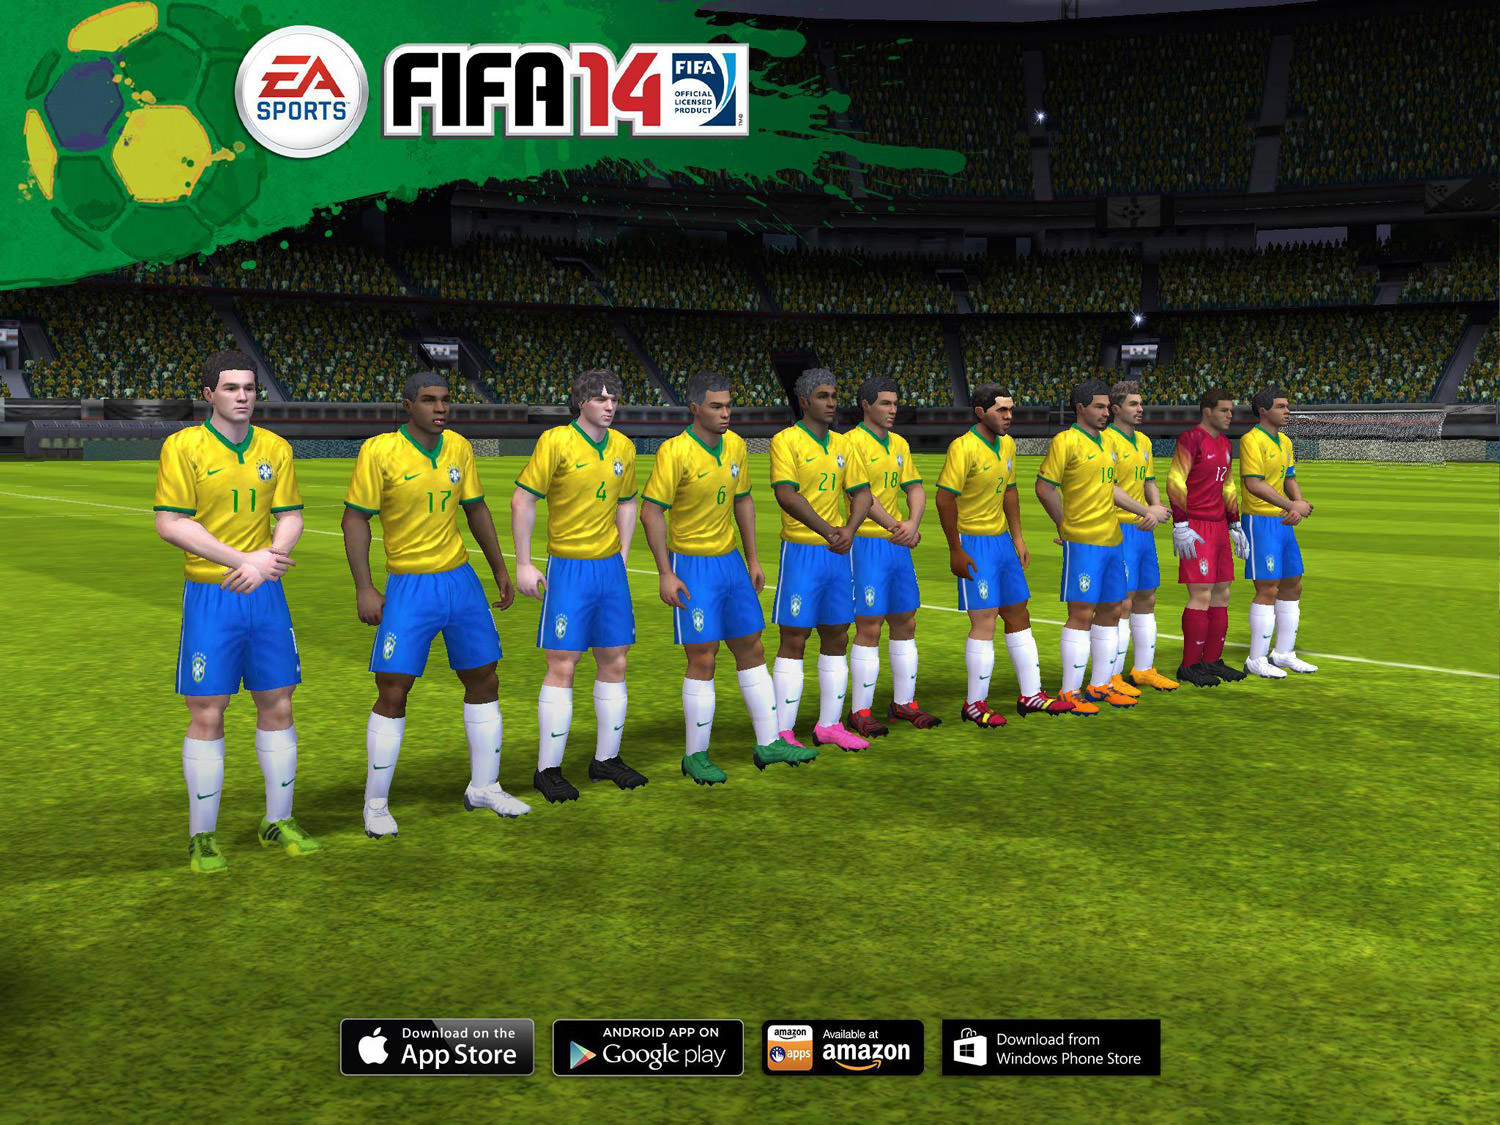 2014 FIFA World Cup on FIFA 14 Mobile